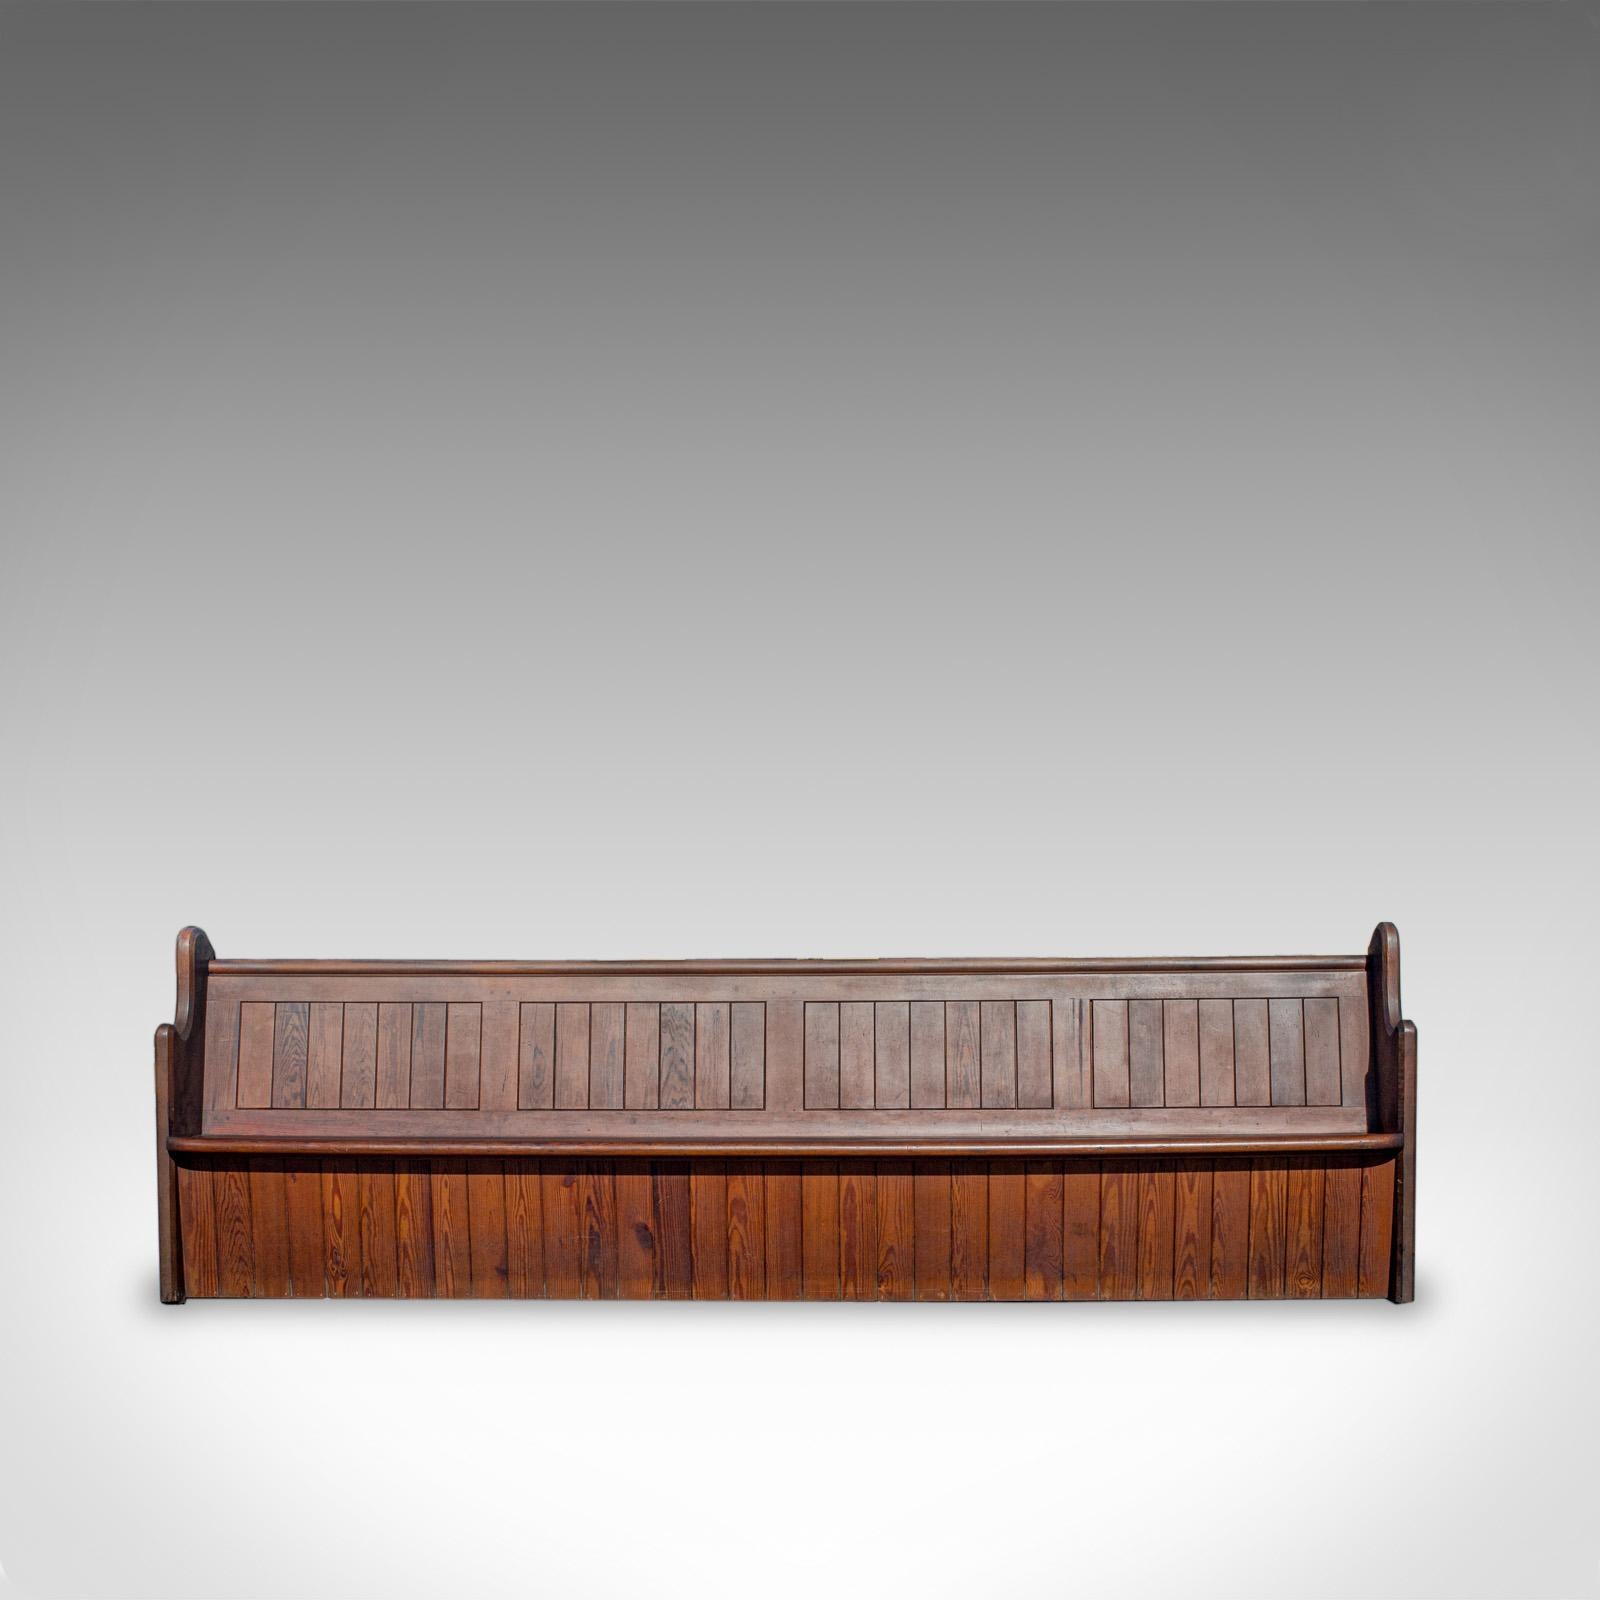 This is a large (10') antique pew. An English, pitch pine bench seat for 7-8 people and dating to the late 19th century, circa 1880.

Impressive proportion at 10ft wide, seating 7-8 people
Displays fine grain interest and a desirable aged